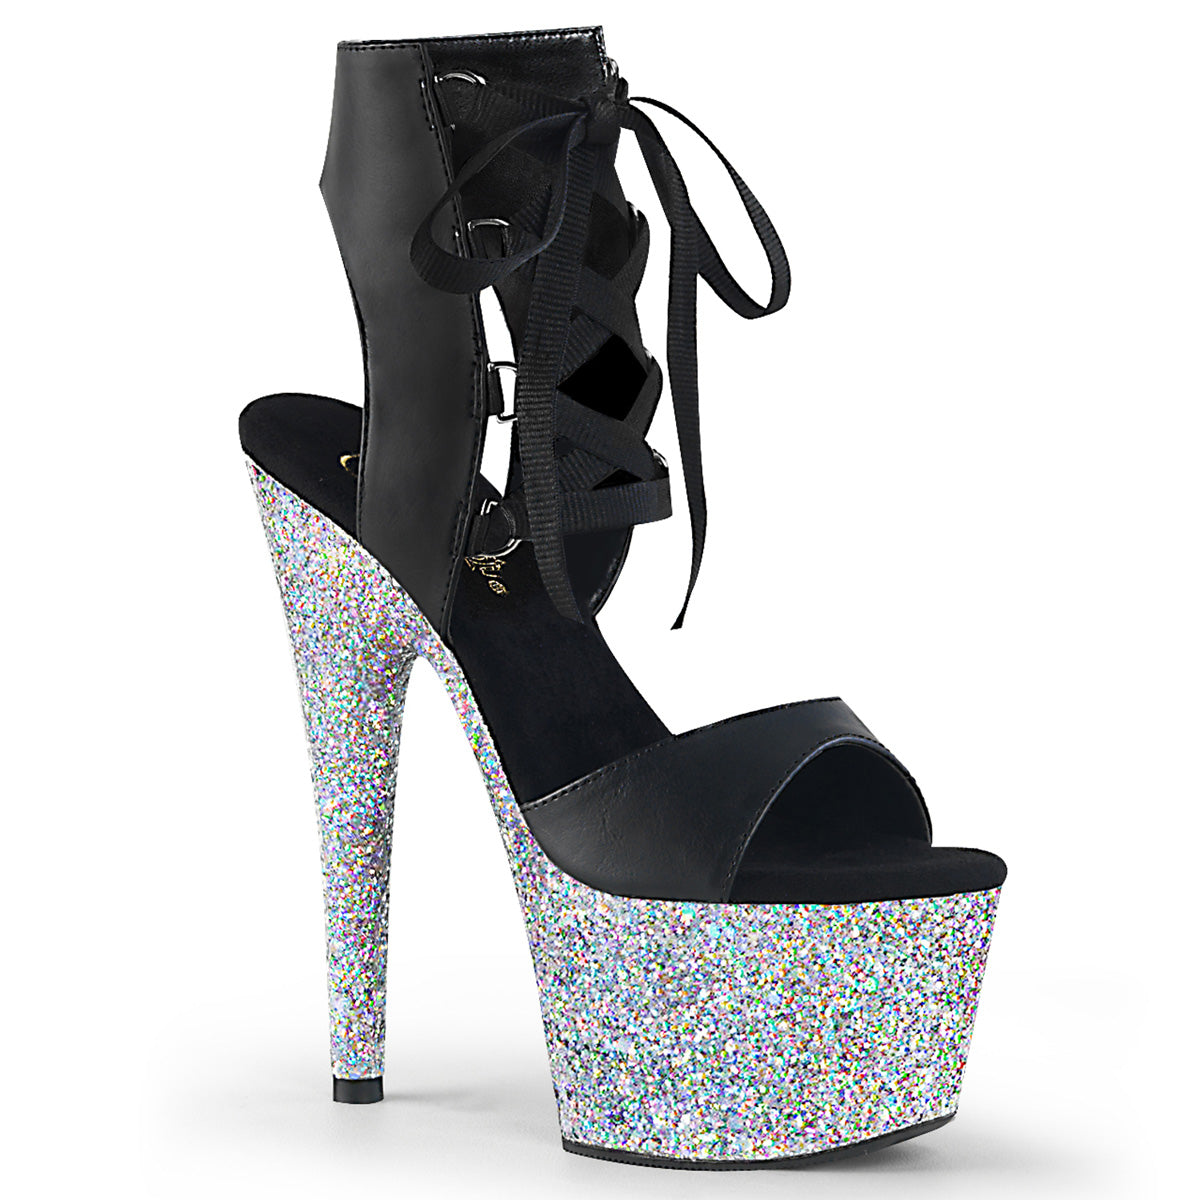 ADORE-700-14LG Sexy 7" Heel Black Sexy Sandals-Pleaser- Sexy Shoes